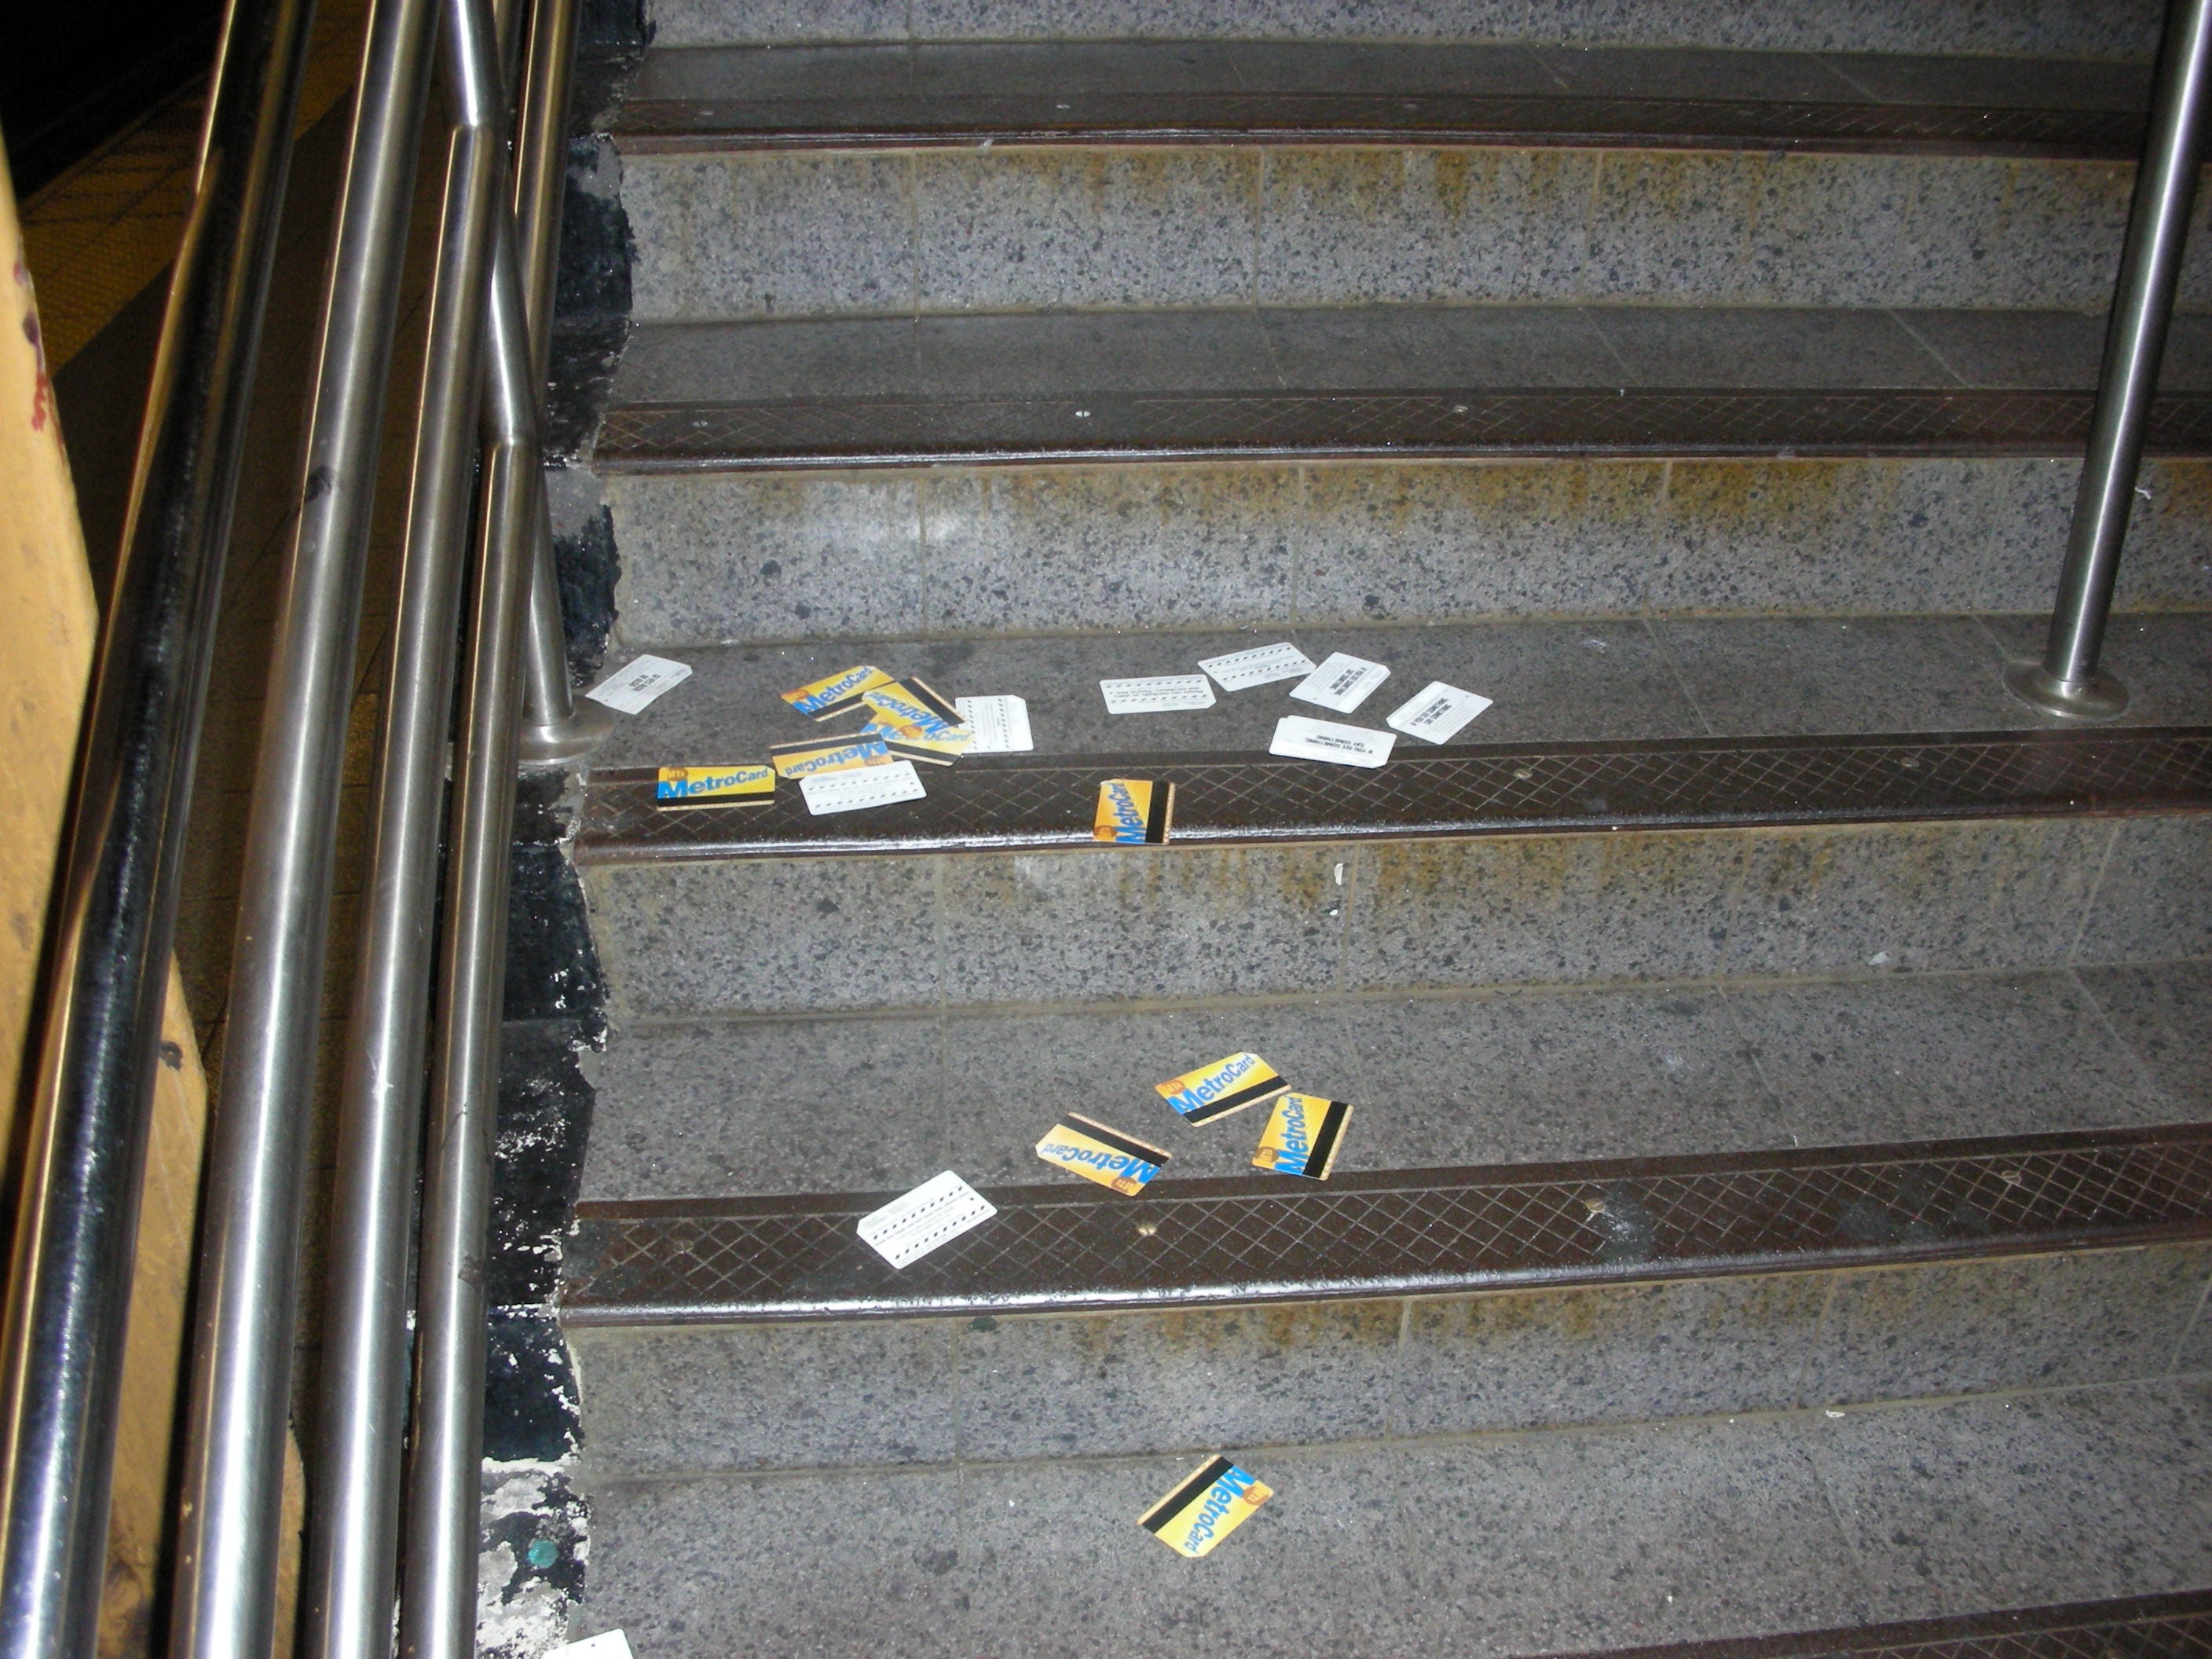 Metrocards scattered on a stairwell in the New York City Subway